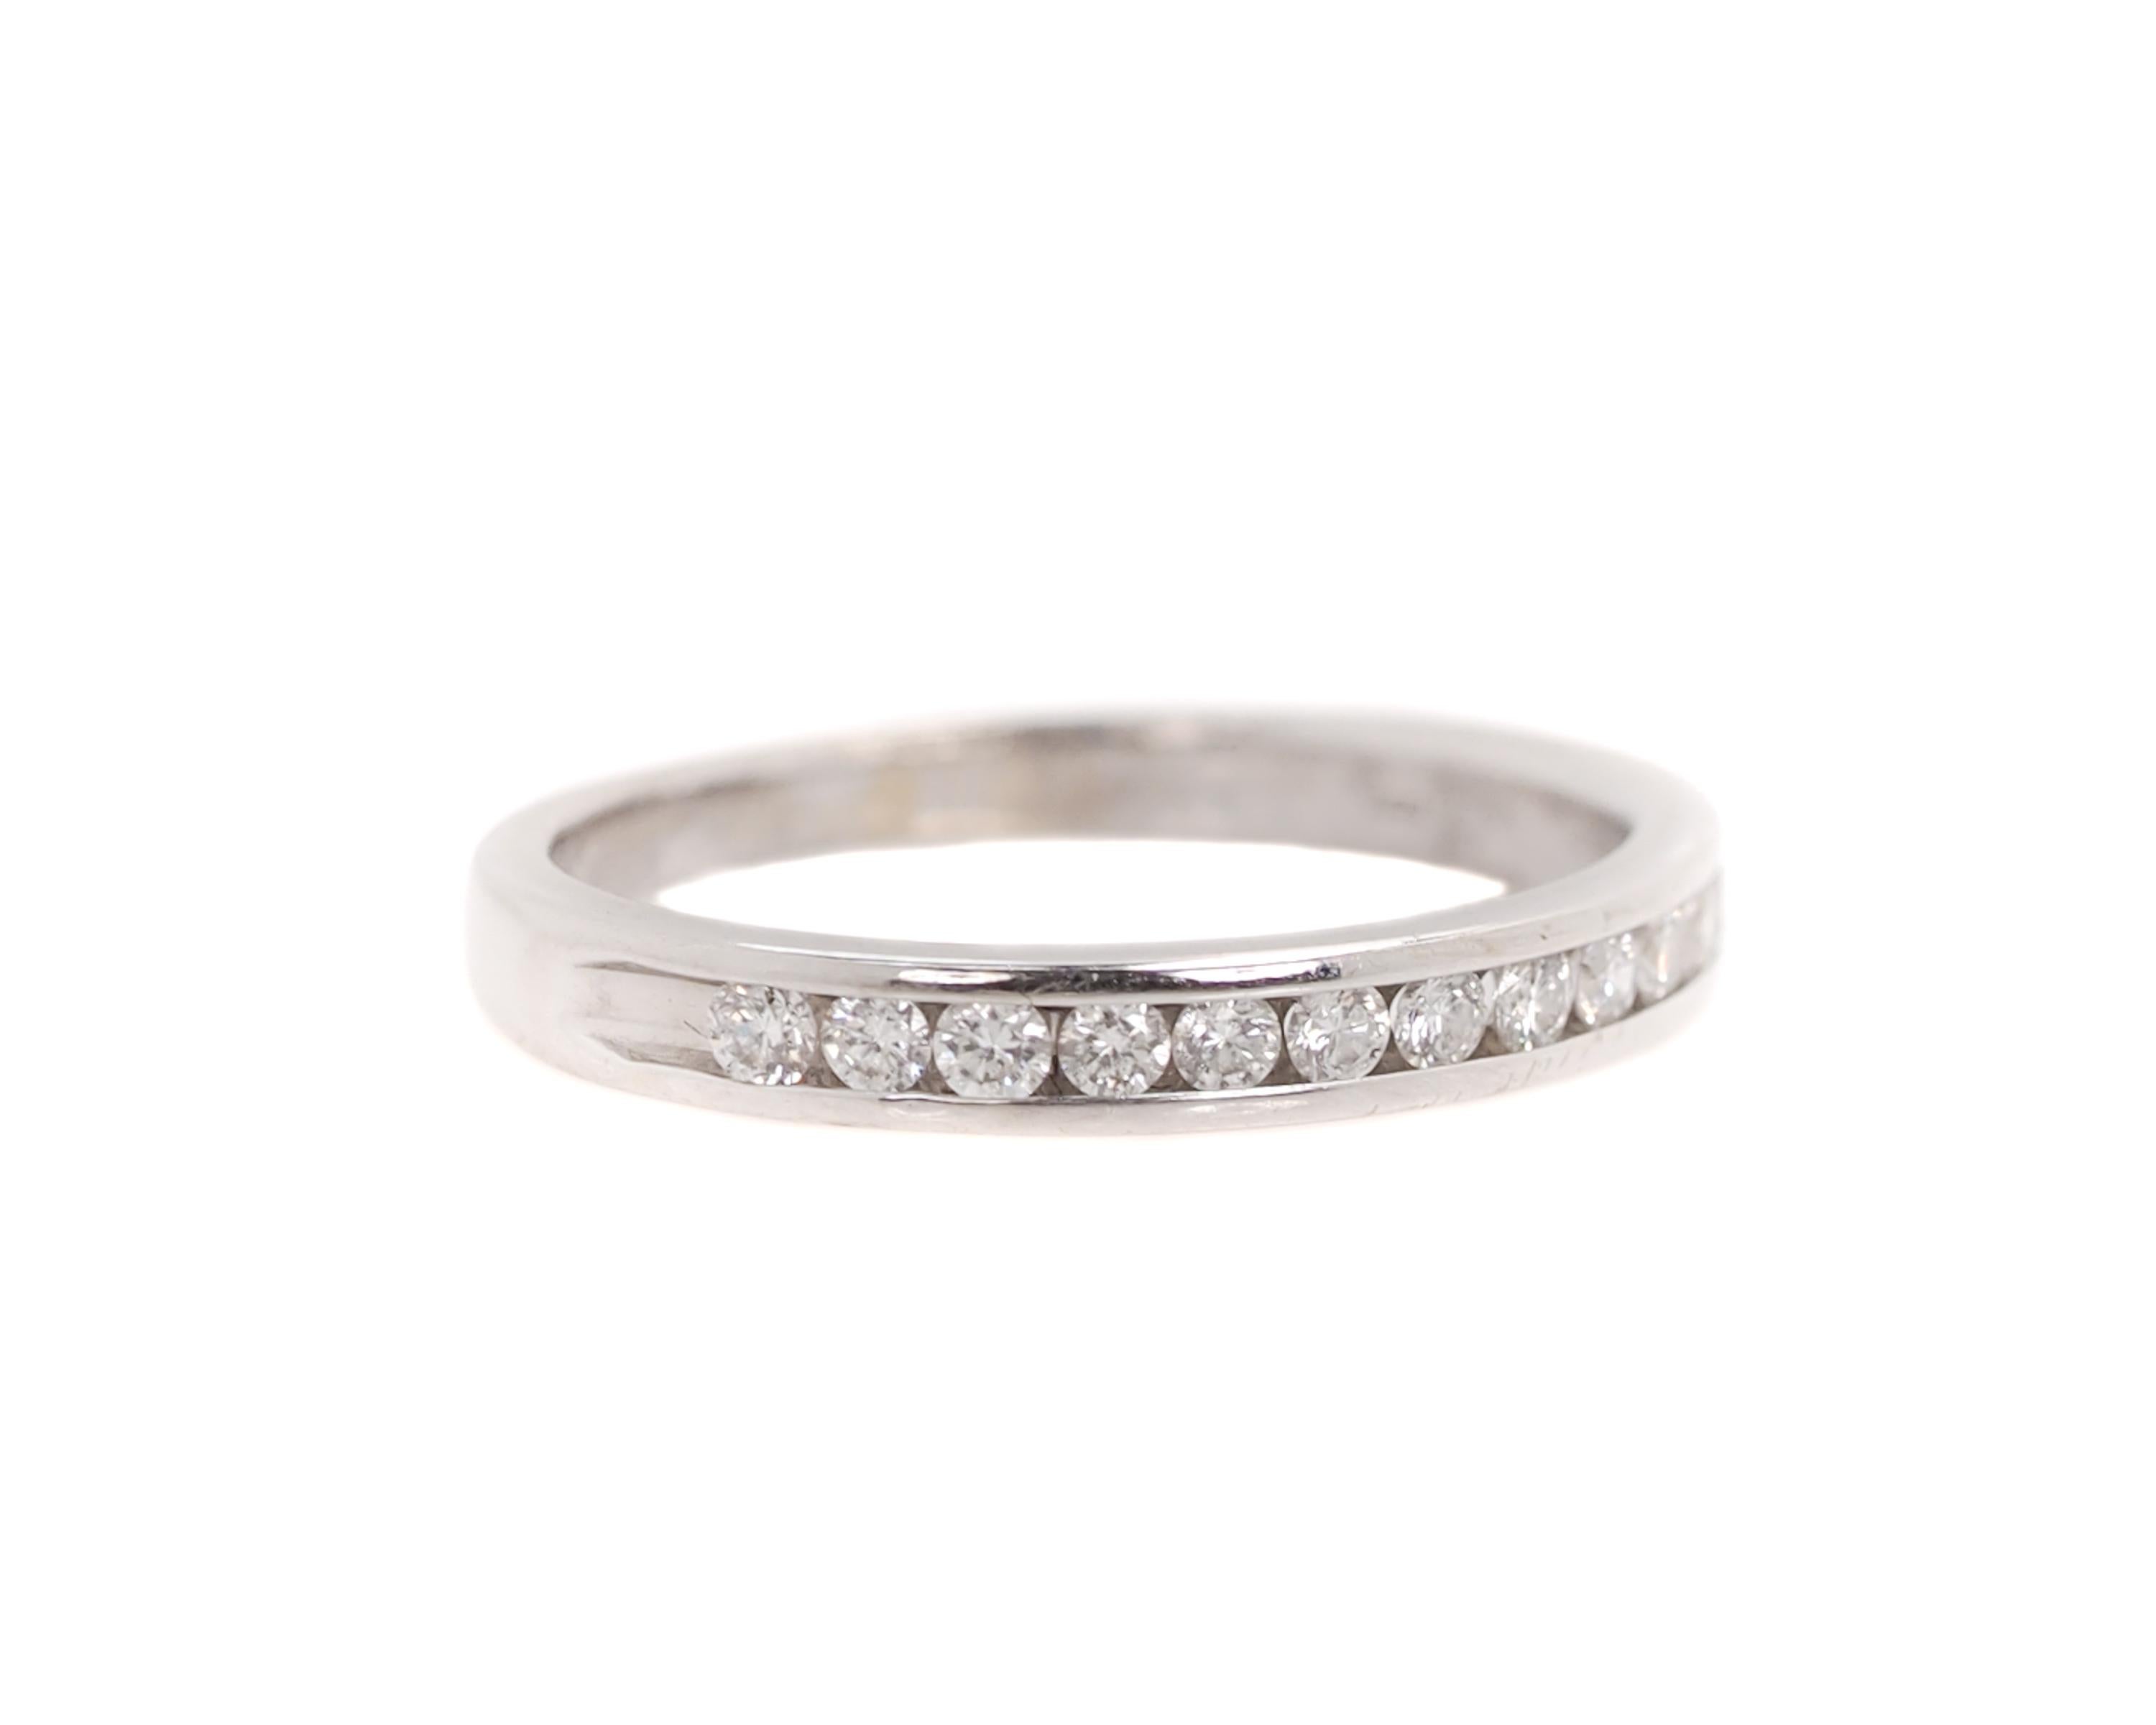 New Halfway Around Eternity Band Wedding Ring 

Features 12 Diamonds channel set in a 14 karat White Gold band. 

The finger to top of ring measures 1.5 millimeters. 
The shank tapers from 2.6 - 1.8 millimeters.

Ring Details:
Metal Type: 14k White